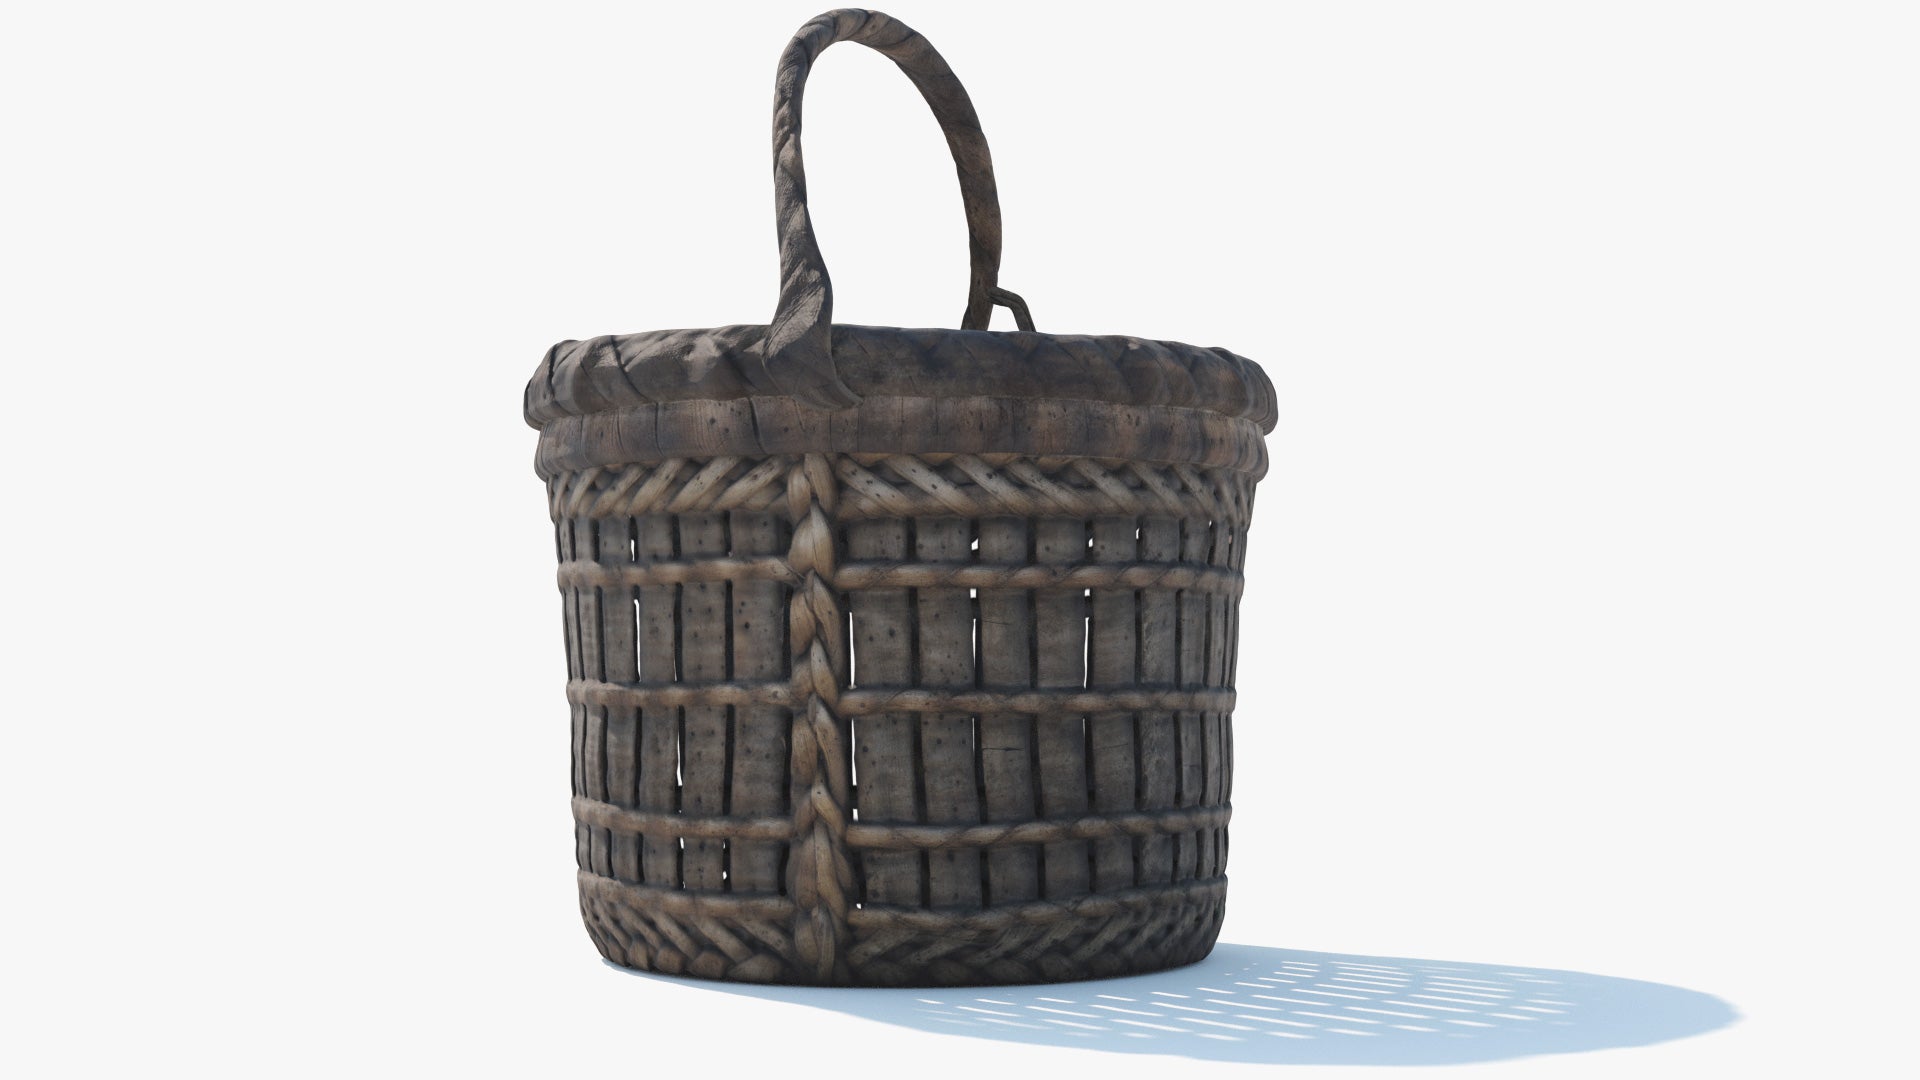 Side view of a 3D model of a rustic, handmade, cylindrical wicker basket with a uneven handle. The model has a small poly count and PBR materials